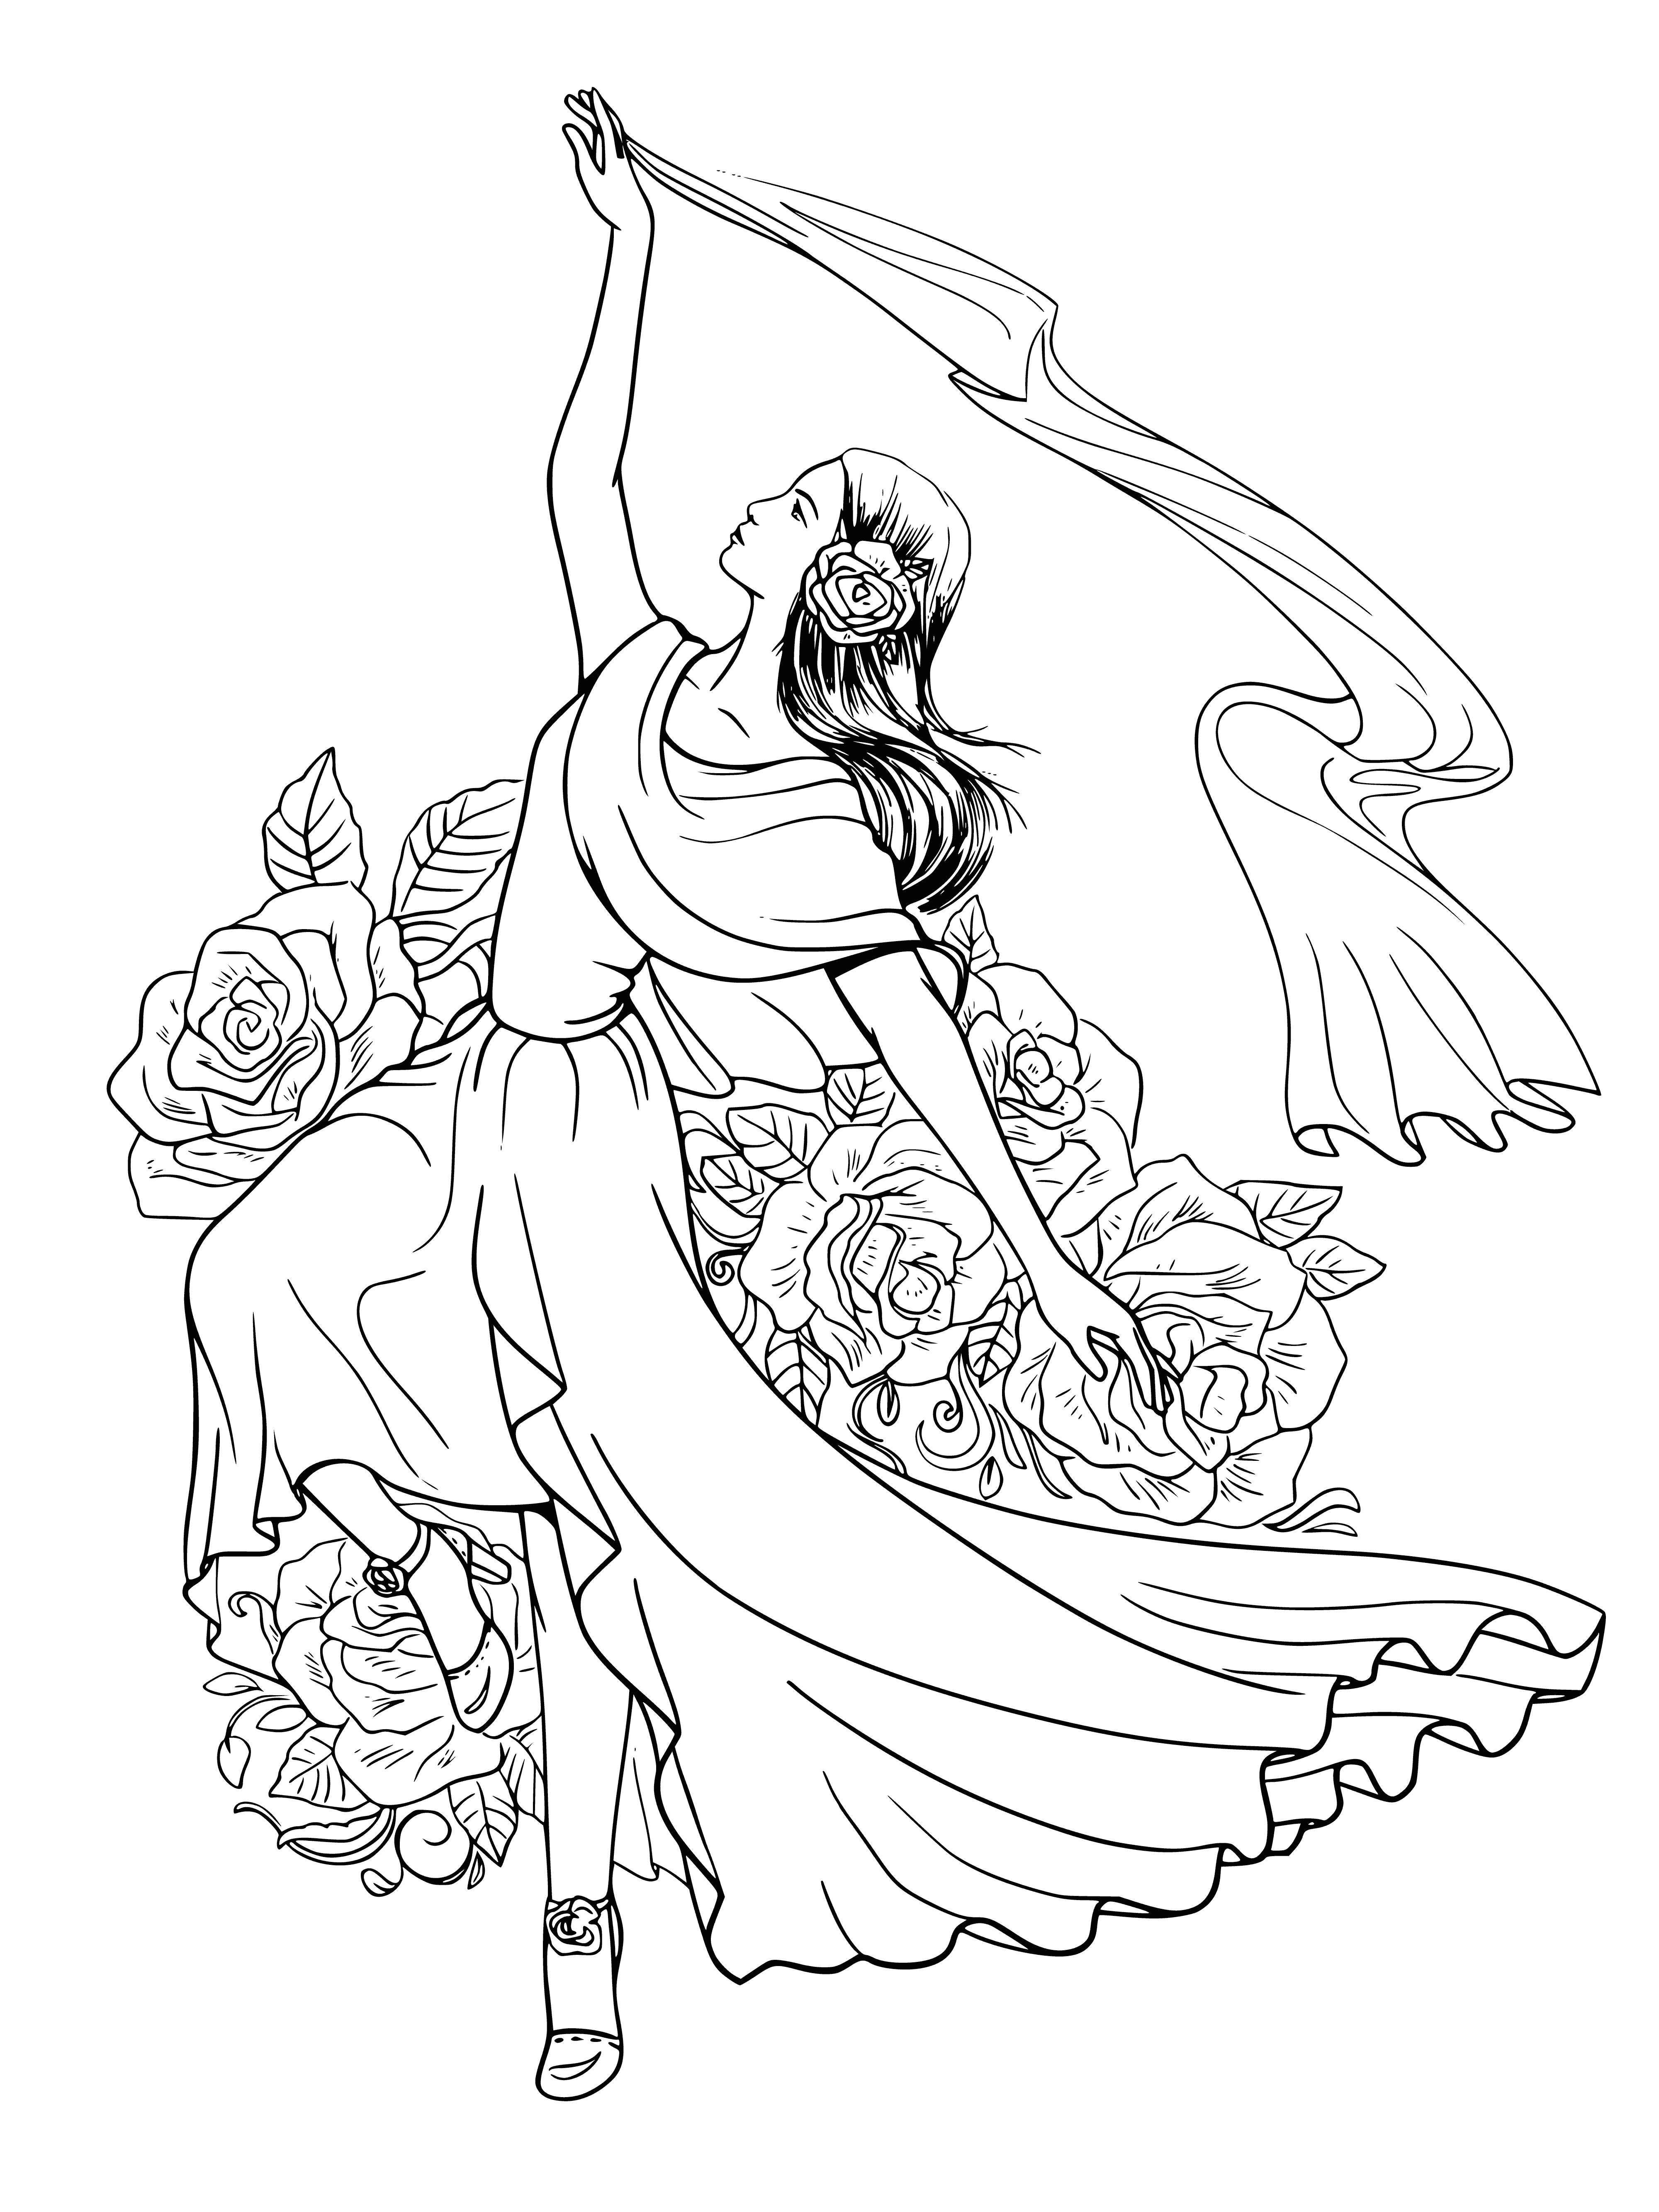 Dance movement coloring page